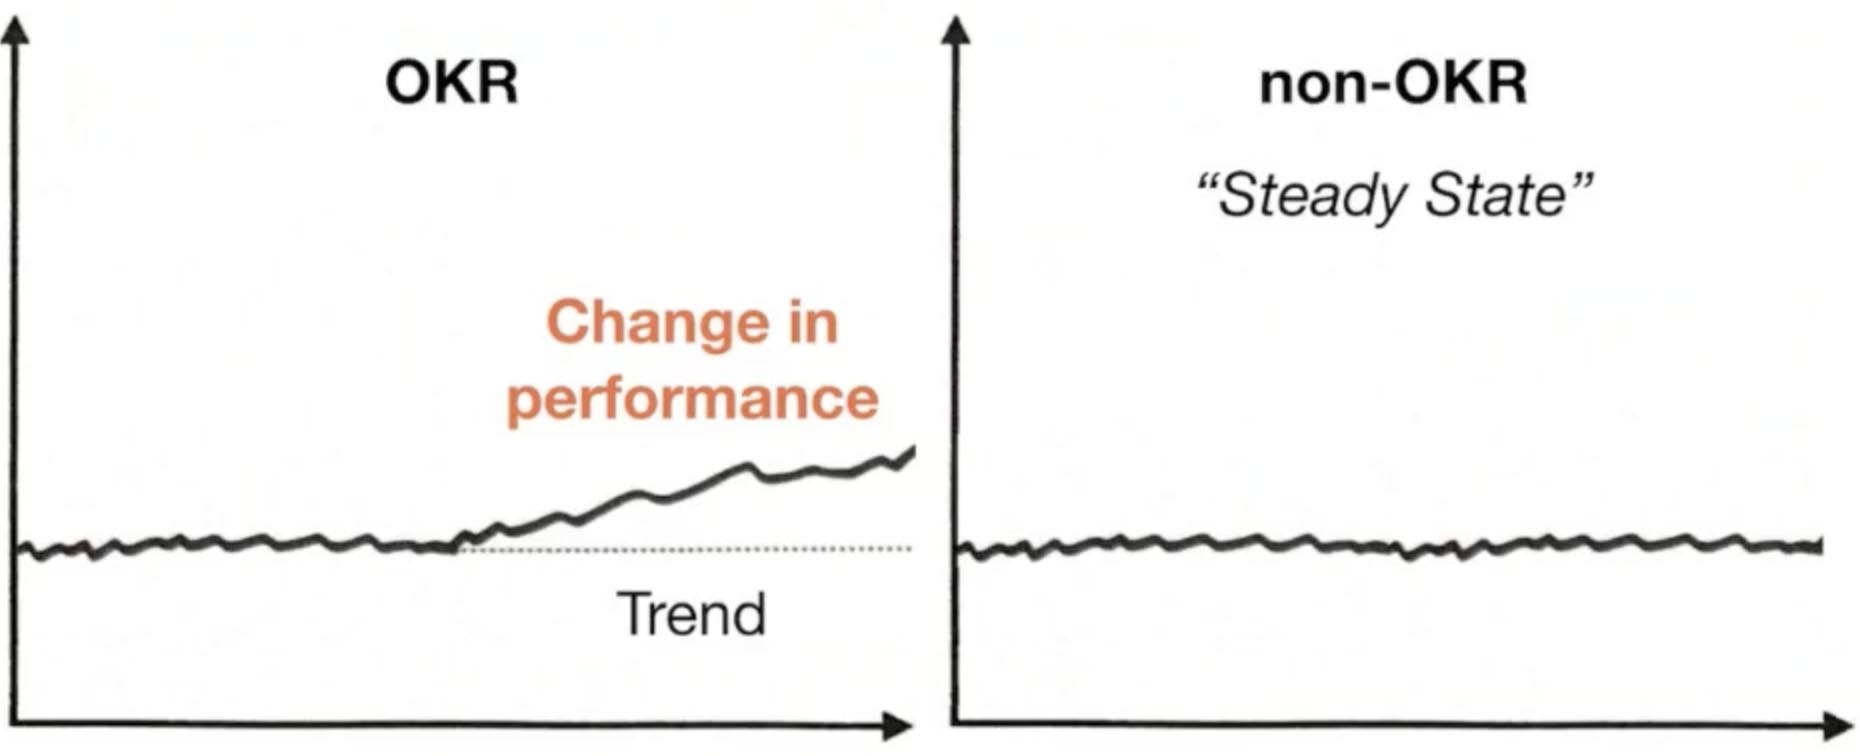 OKRs are a definition that is not the same as KPIs. We have so much data showing the steady state of how things are going. Leave that on its own in some kind of all the monitoring system if you want to monitor. Instead, only focus your OKR efforts on things that you want to change. I believe that is what really works well with OKRs.